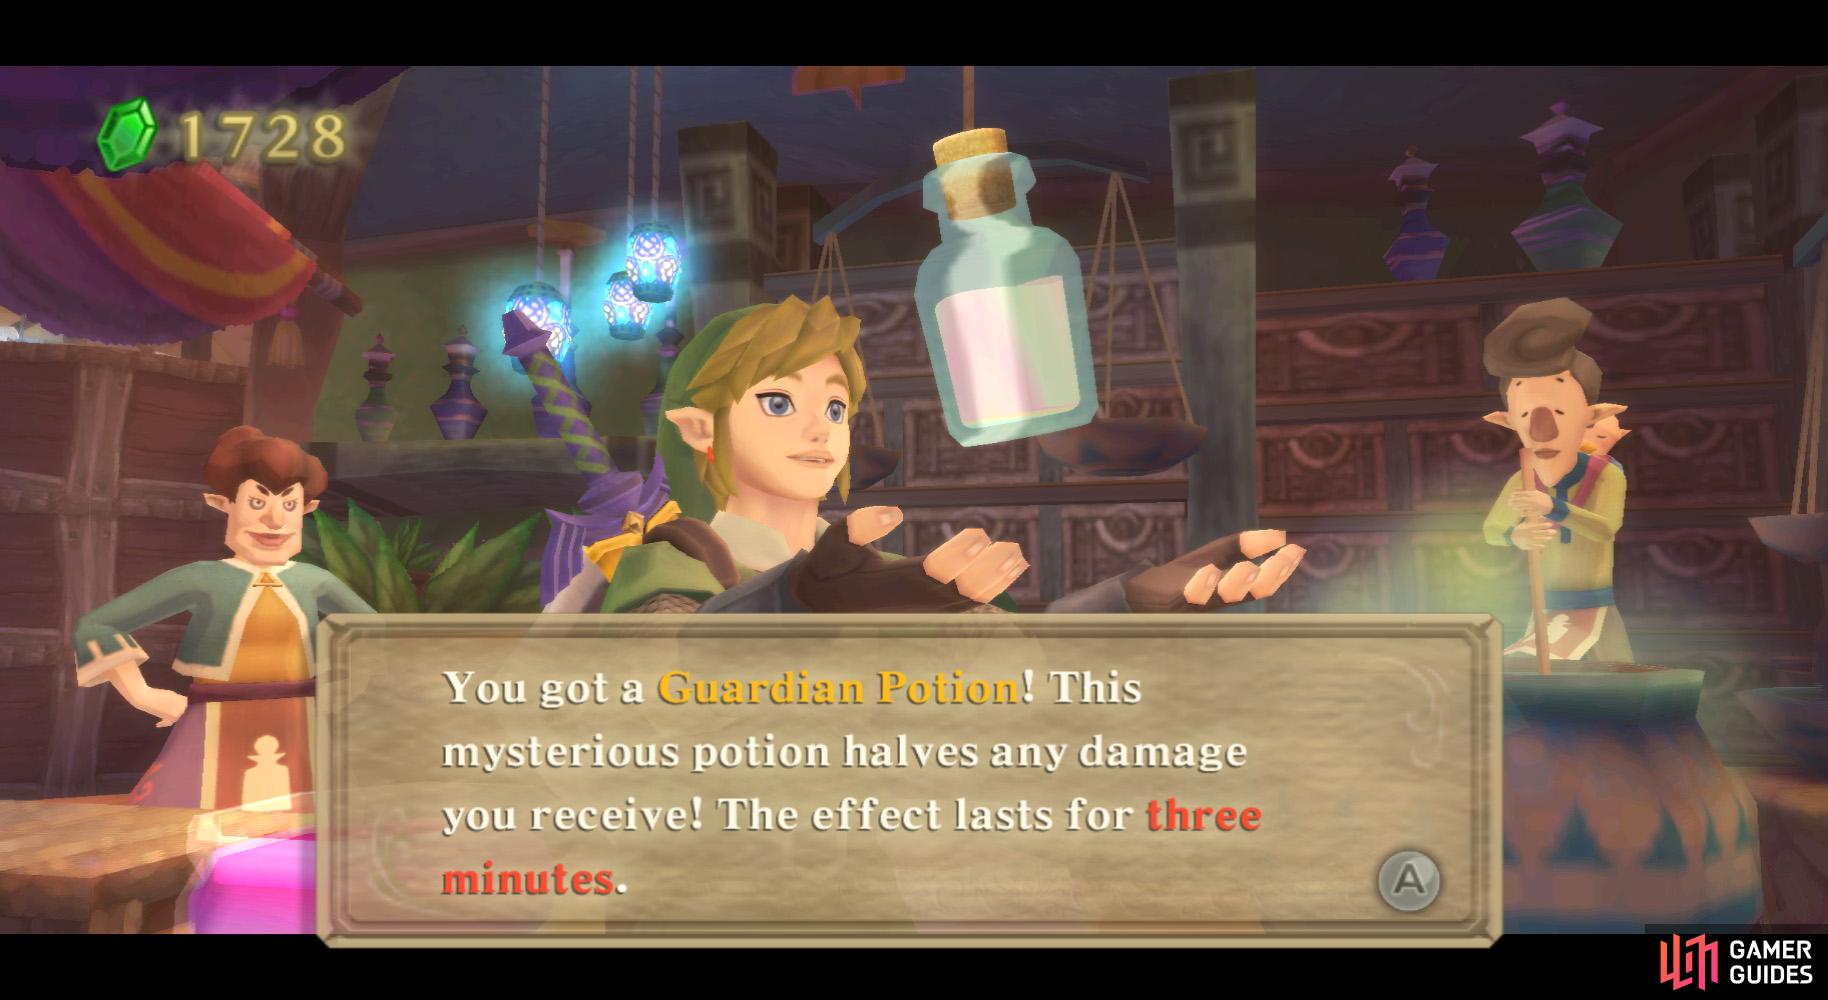 If you're out of ideas for what to fill your Bottles with, visit the Potion Shop.